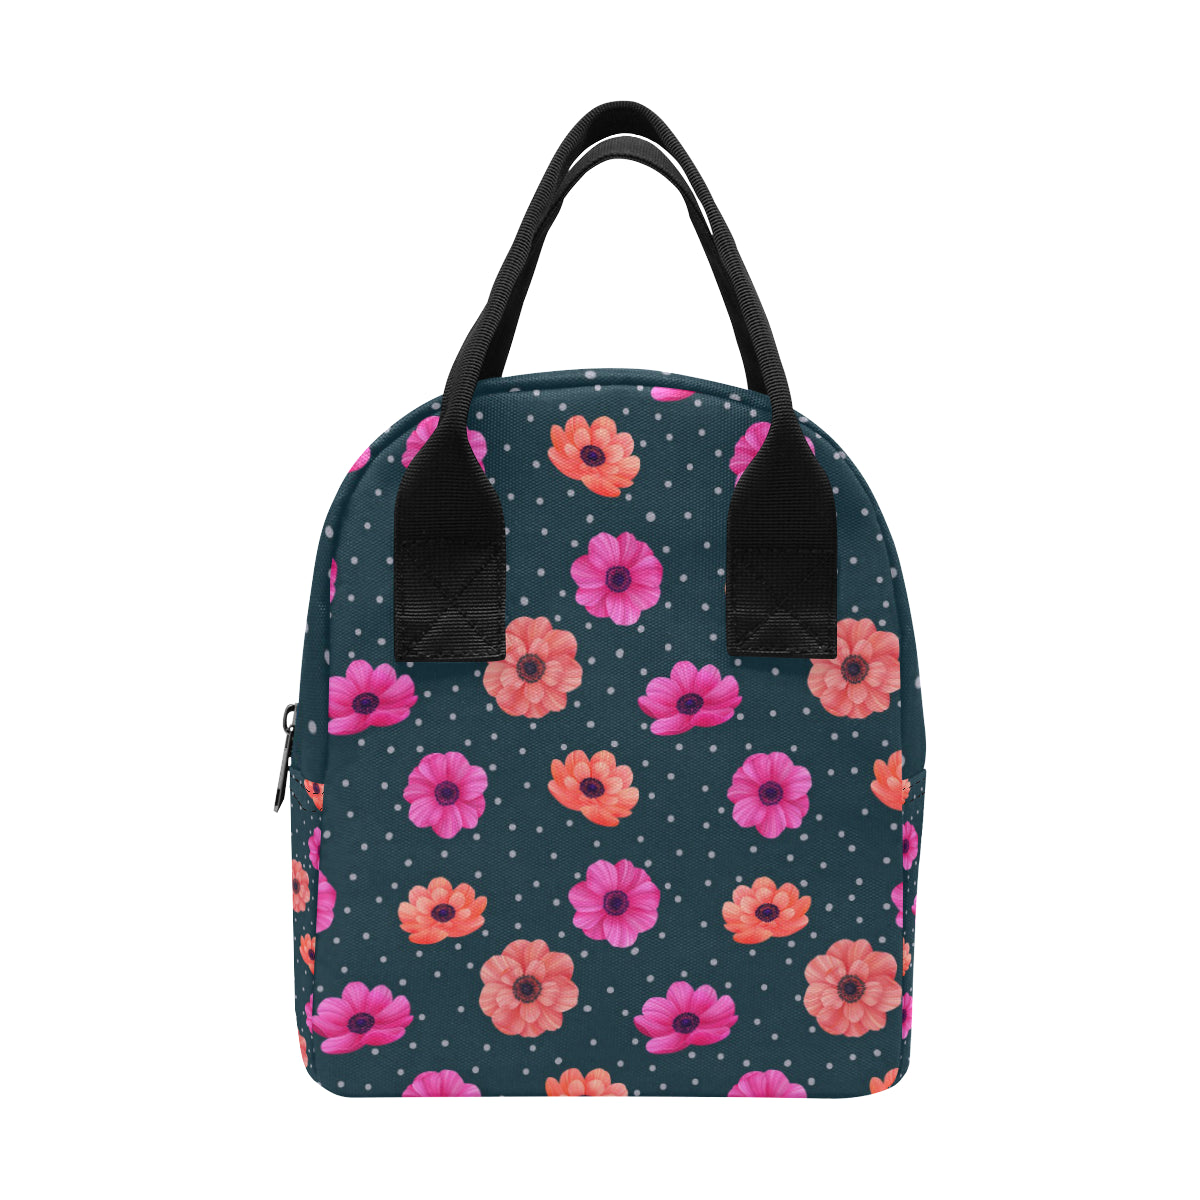 Anemone Pattern Print Design AM08 Insulated Lunch Bag